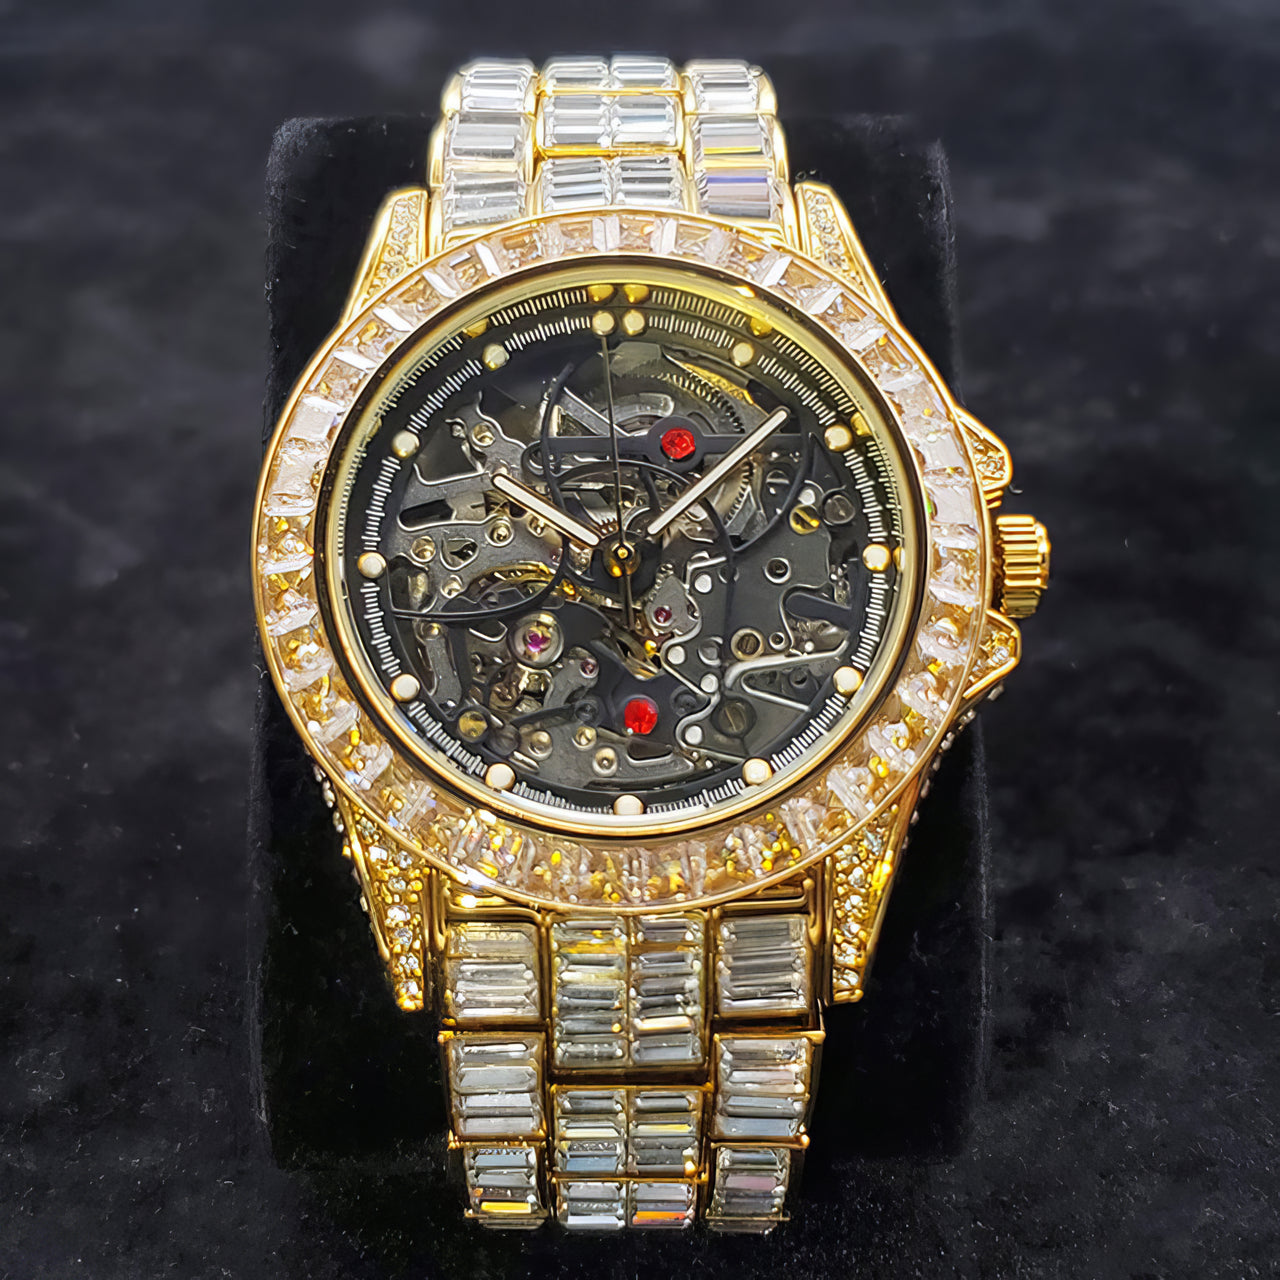 Baguette Mechanical Skeleton Watch - Different Drips